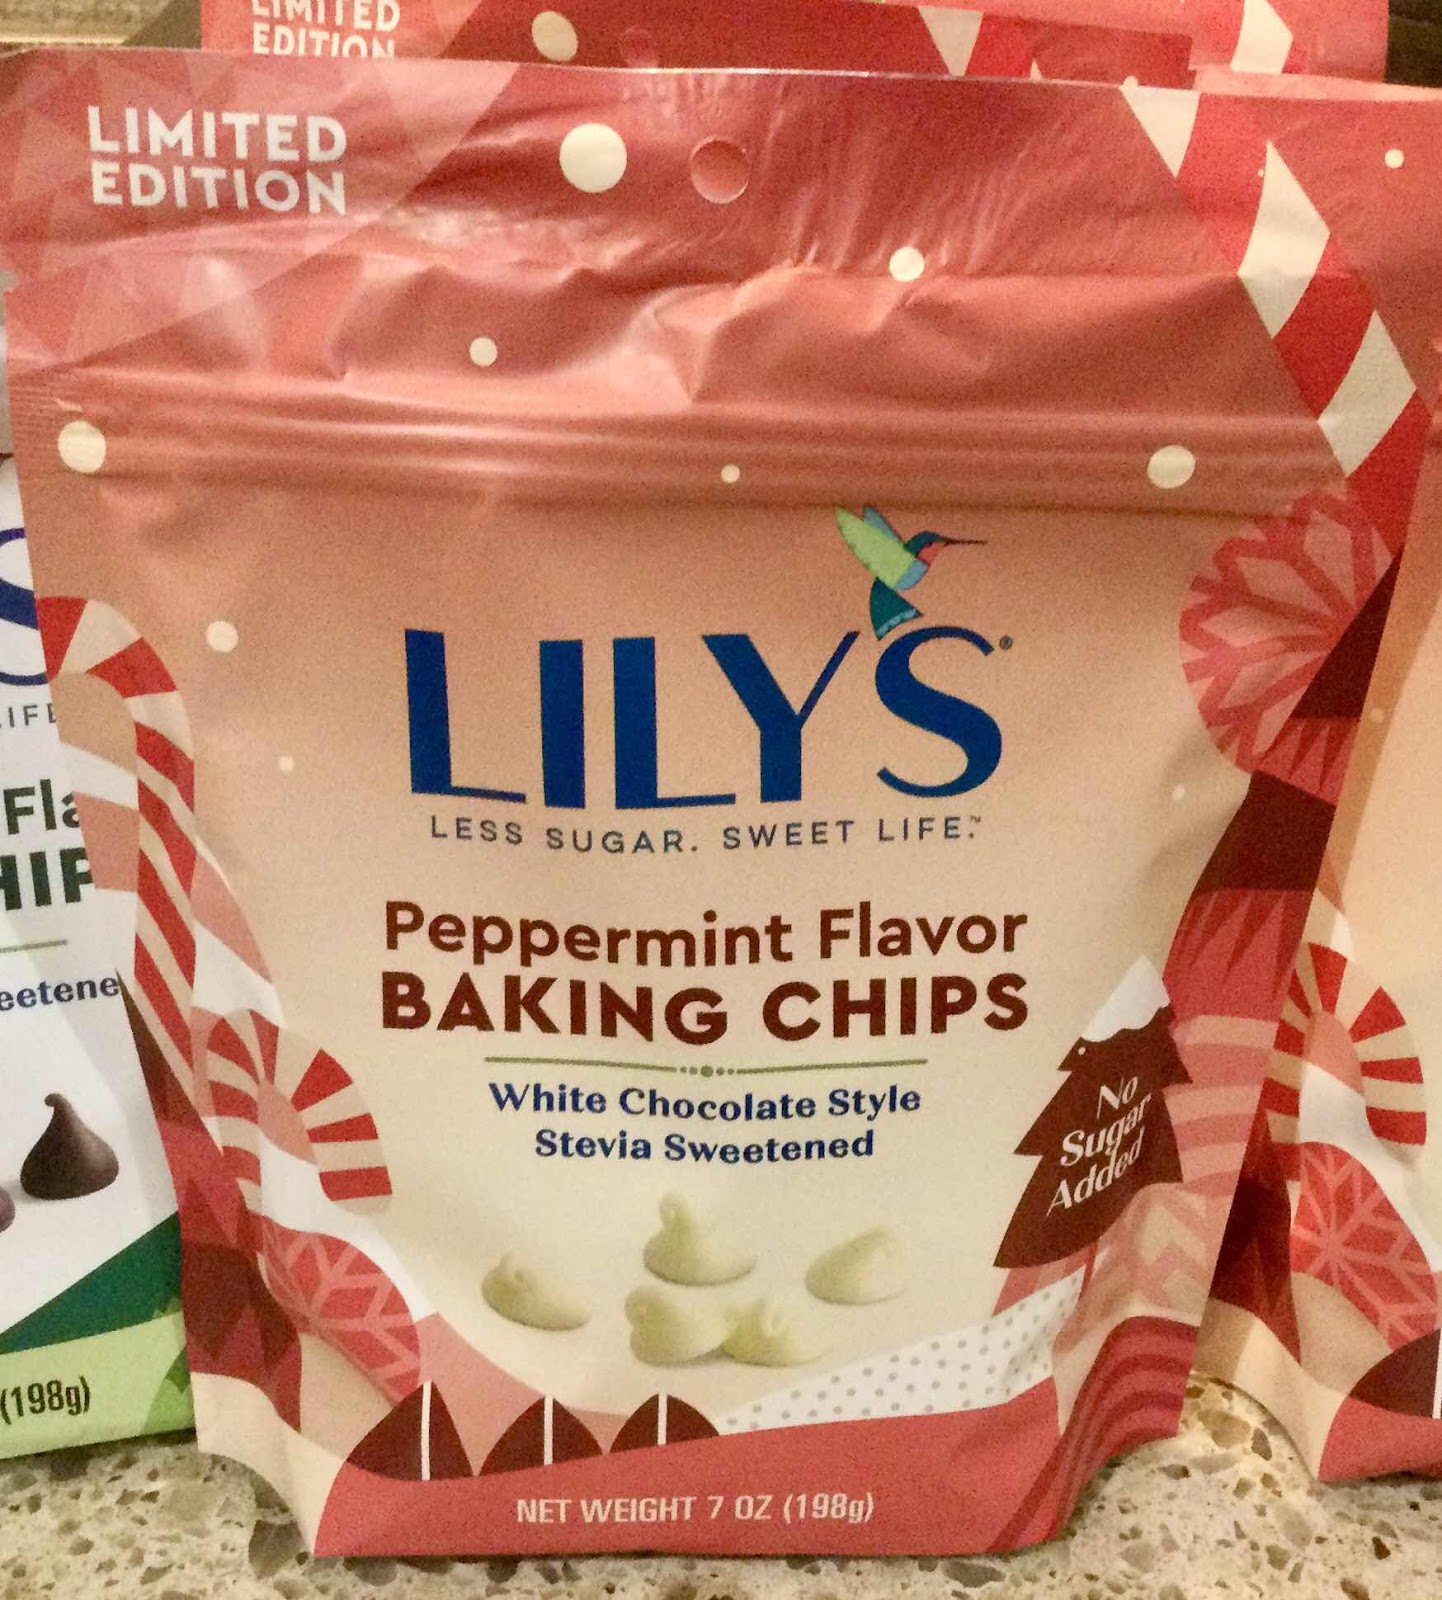 Lily’s Peppermint Baking Chips